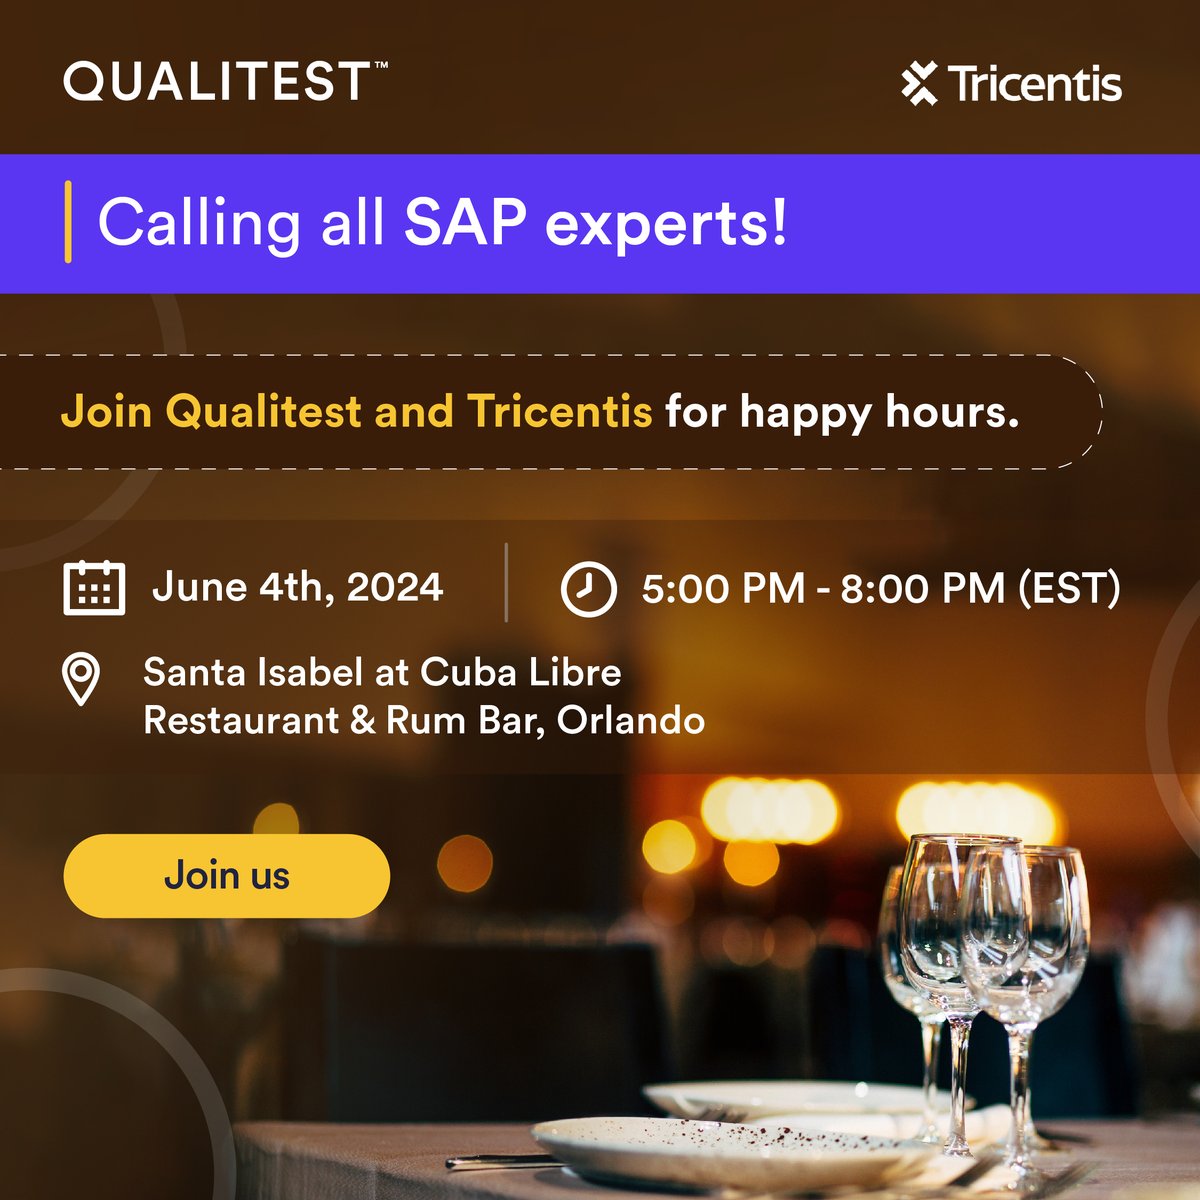 🌟Hey #SAPSapphire attendees!
Join us for an exclusive networking evening hosted by Qualitest and @Tricentis at Cuba Libre Restaurant & Rum Bar on June 4th, 5-8 PM (EST).
Limited space now 👉 bit.ly/3vXsqE3
#SAPSapphire2024 #QualitestAtSAPSapphire #LifeAtQualitest